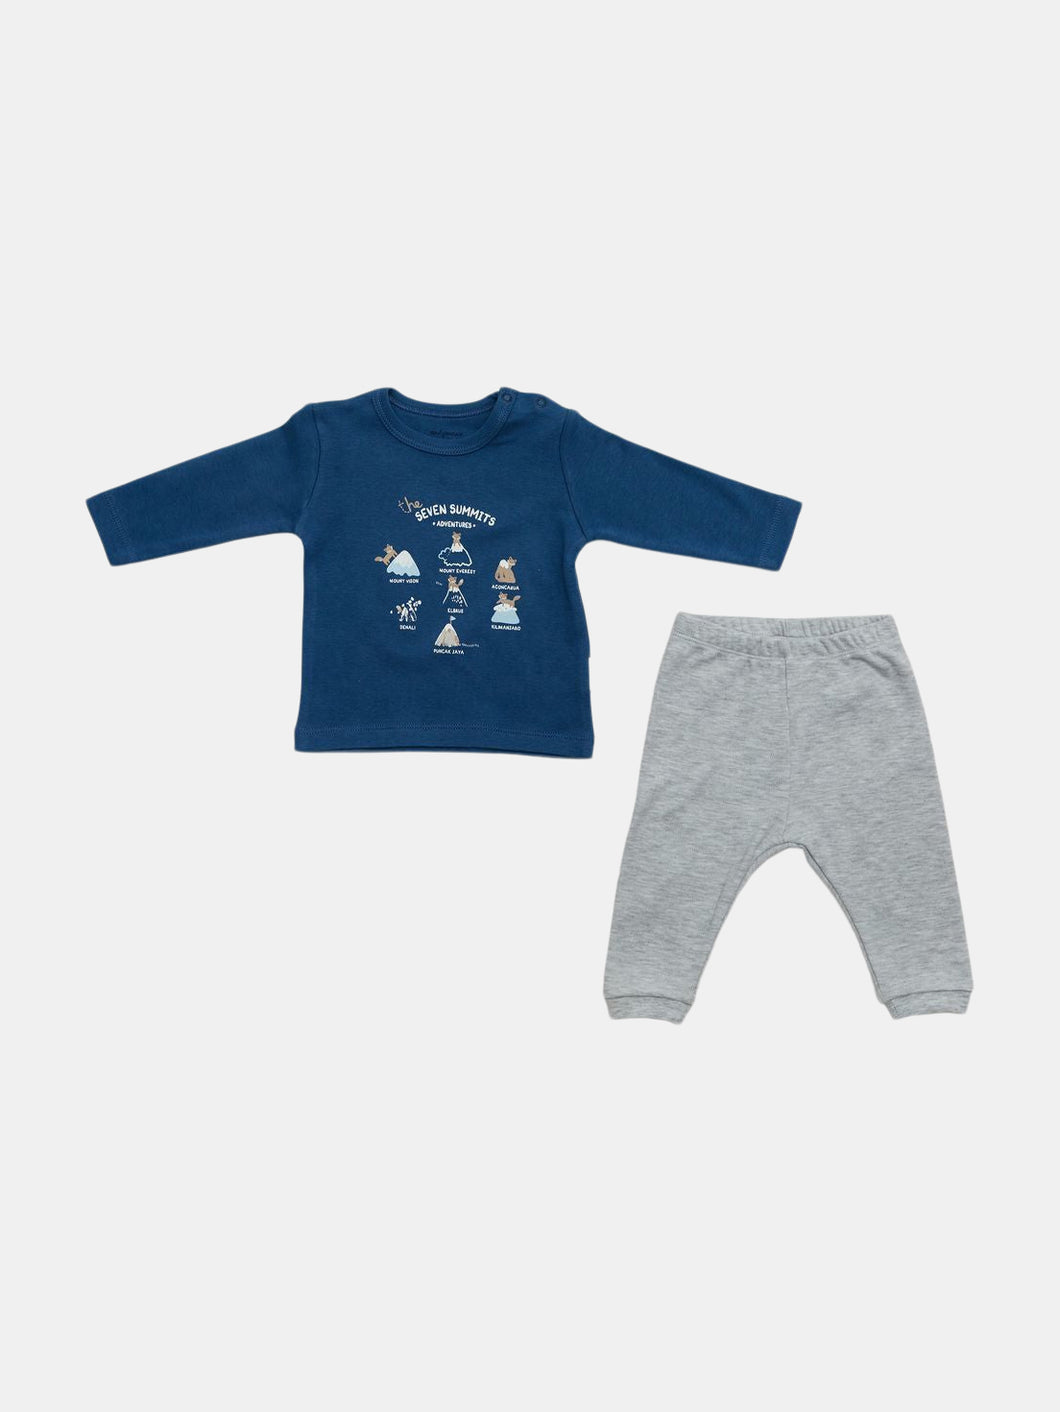 Navy Little Climber Outfit